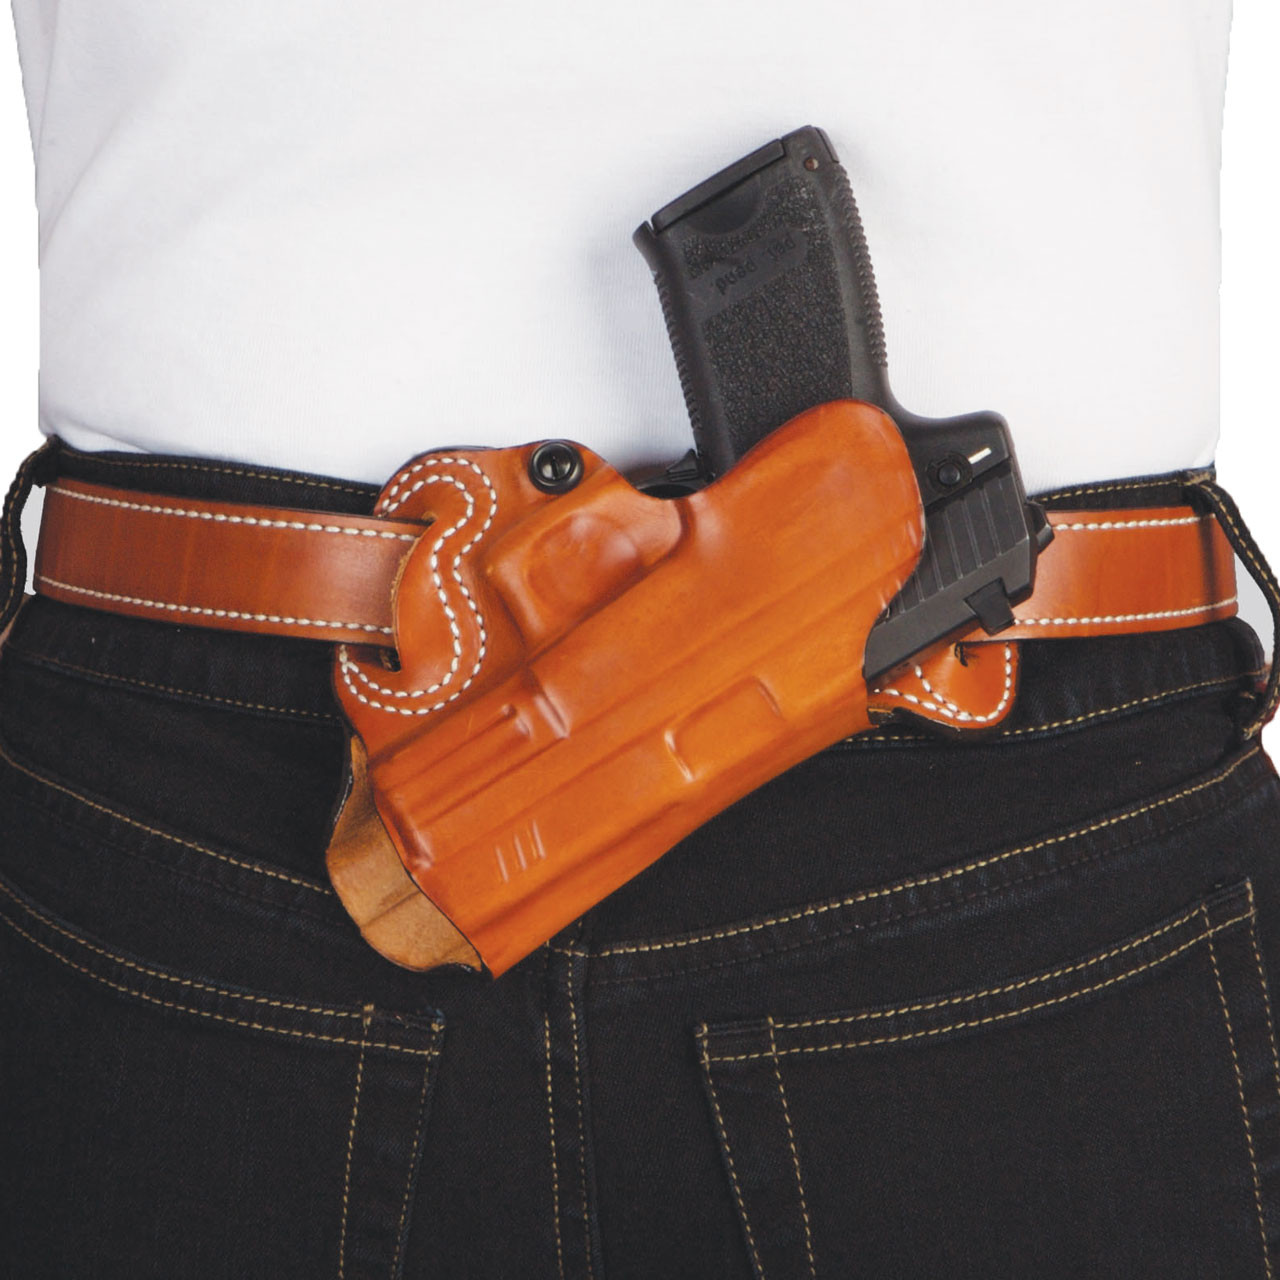 PRO CARRY HOLSTERS - GUN HOLSTERS